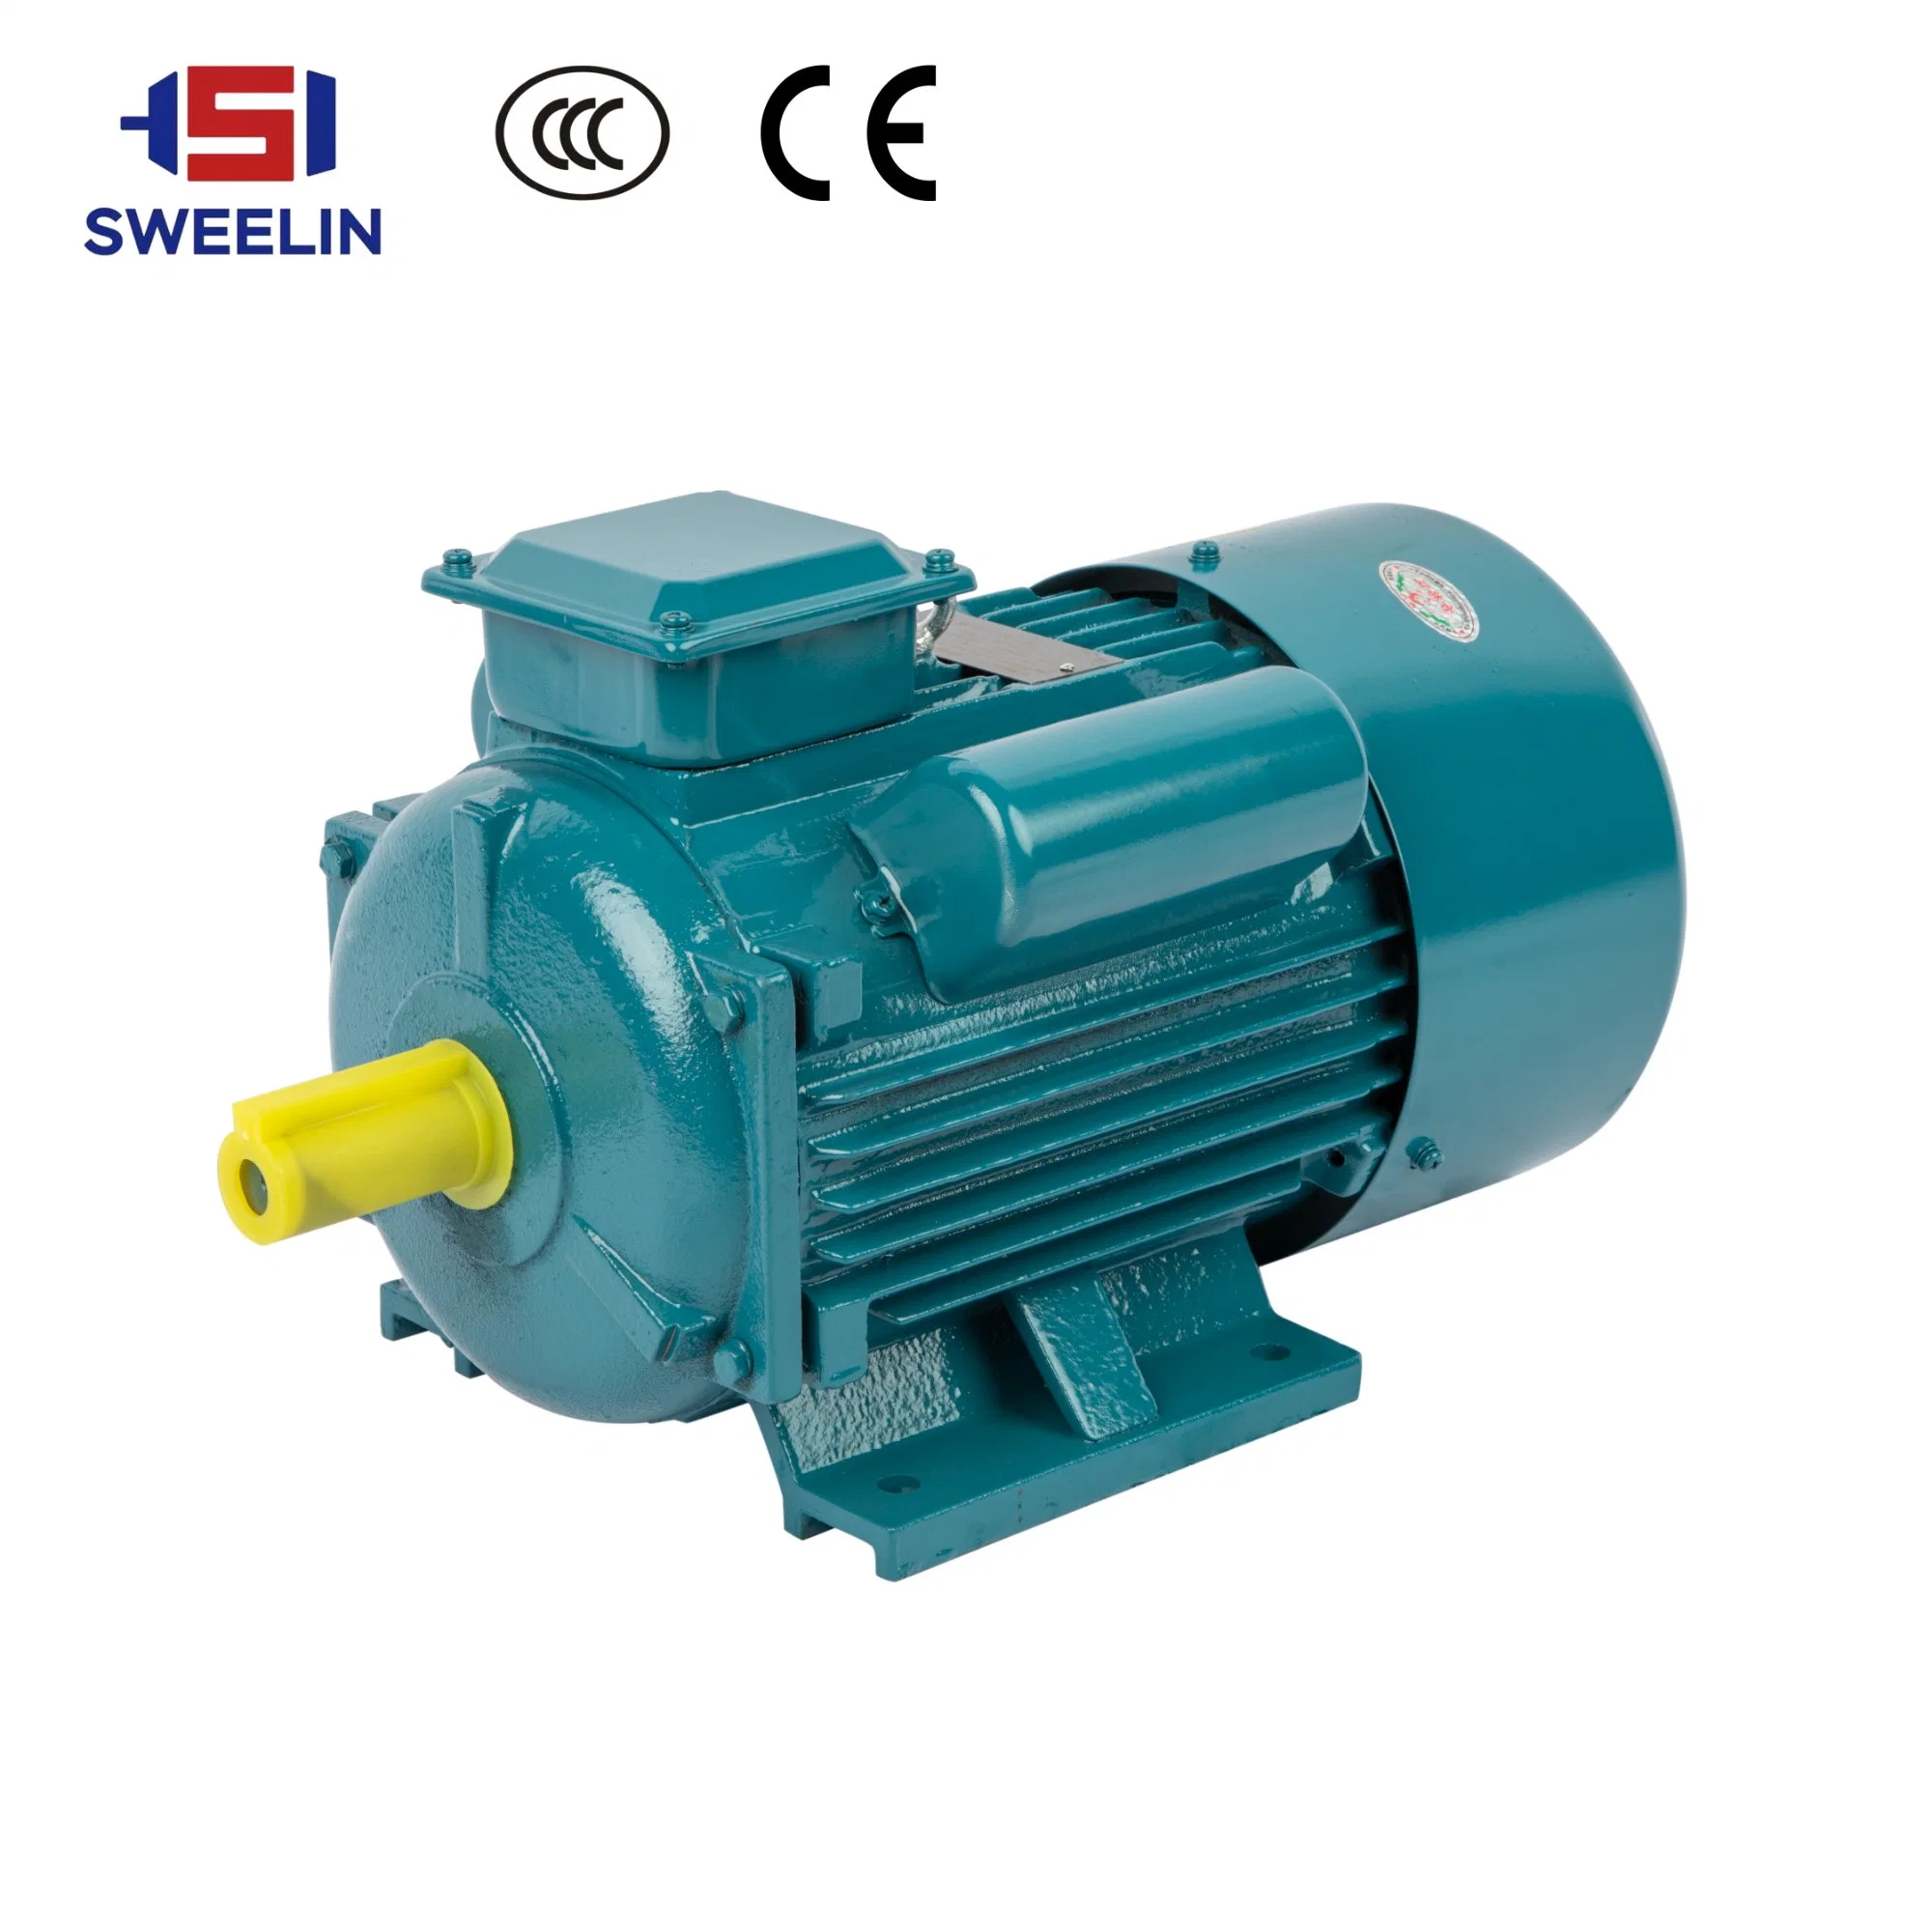 Single-Phase Electric Motor CE Certification Can Support Customization